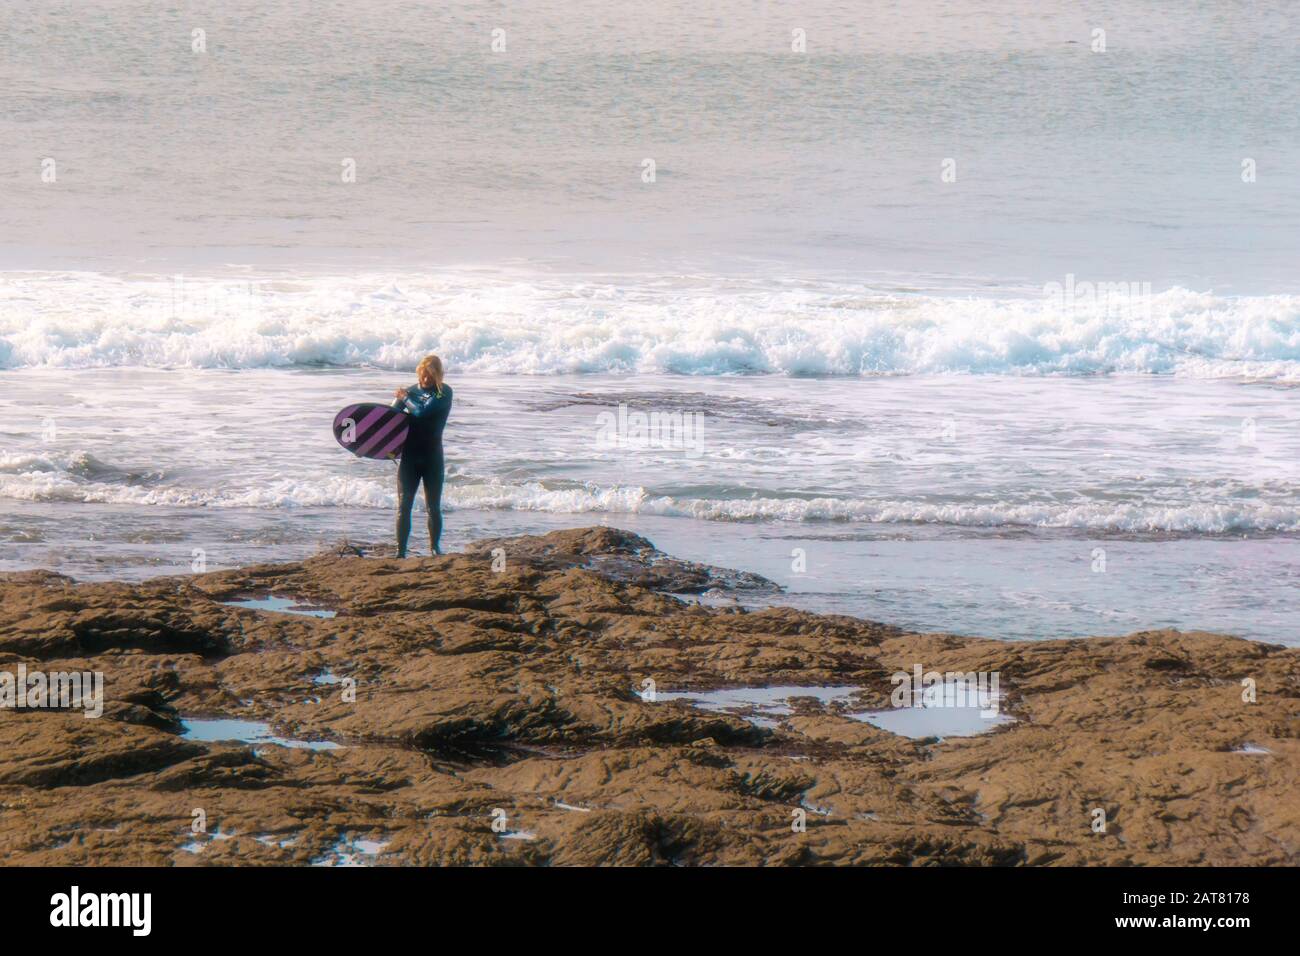 Surfer getting out of the water at Porthleven, Cornwall, October 2019 Stock Photo